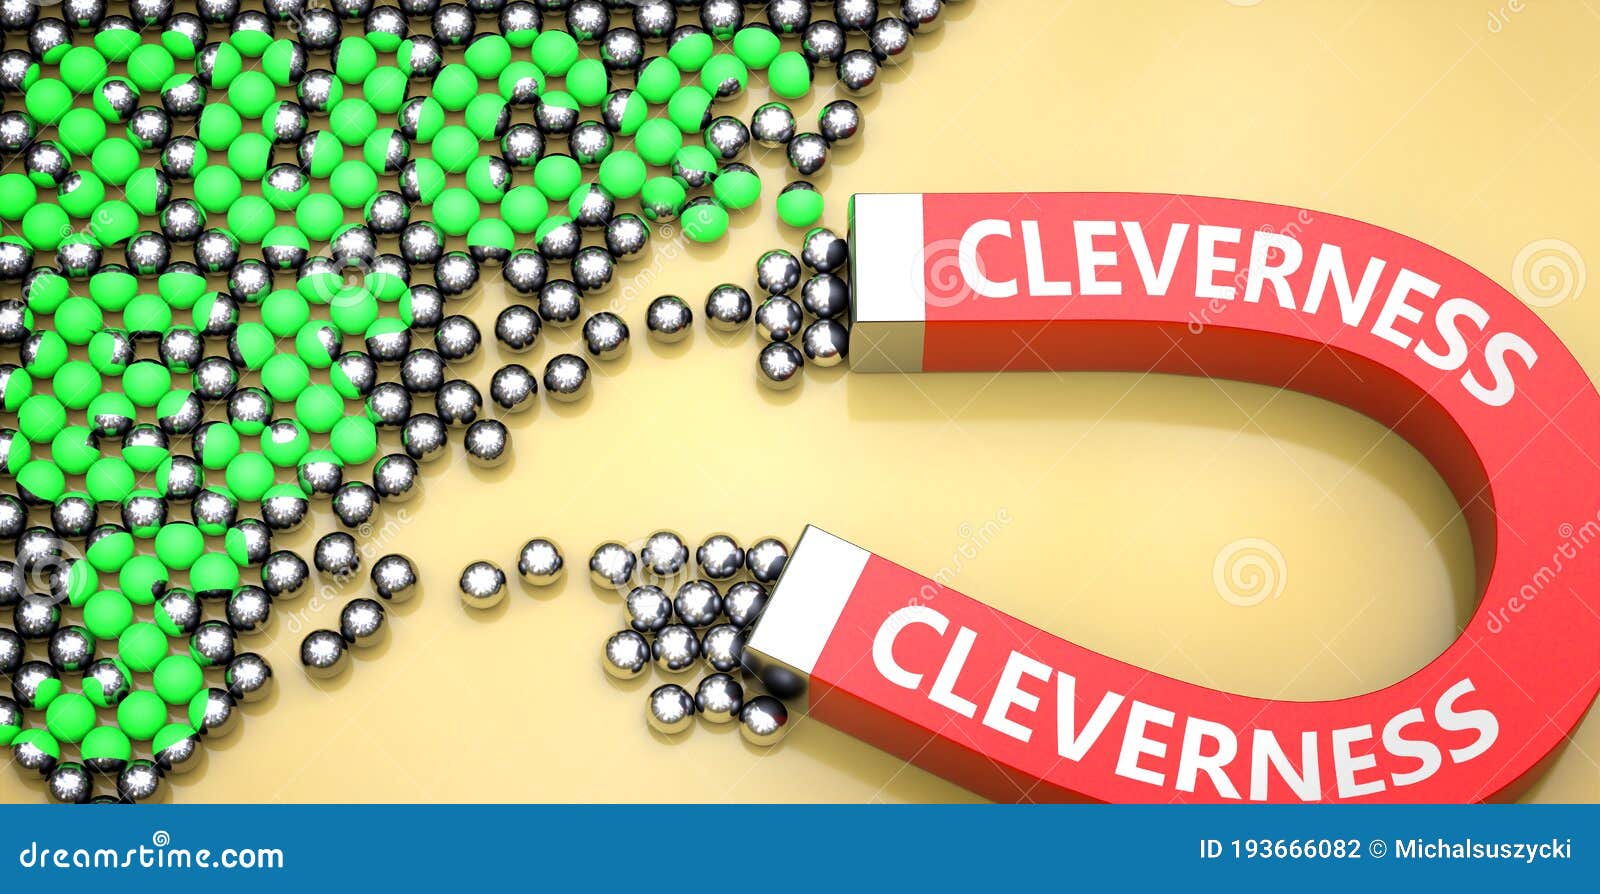 cleverness attracts success - pictured as word cleverness on a magnet to ize that cleverness can cause or contribute to